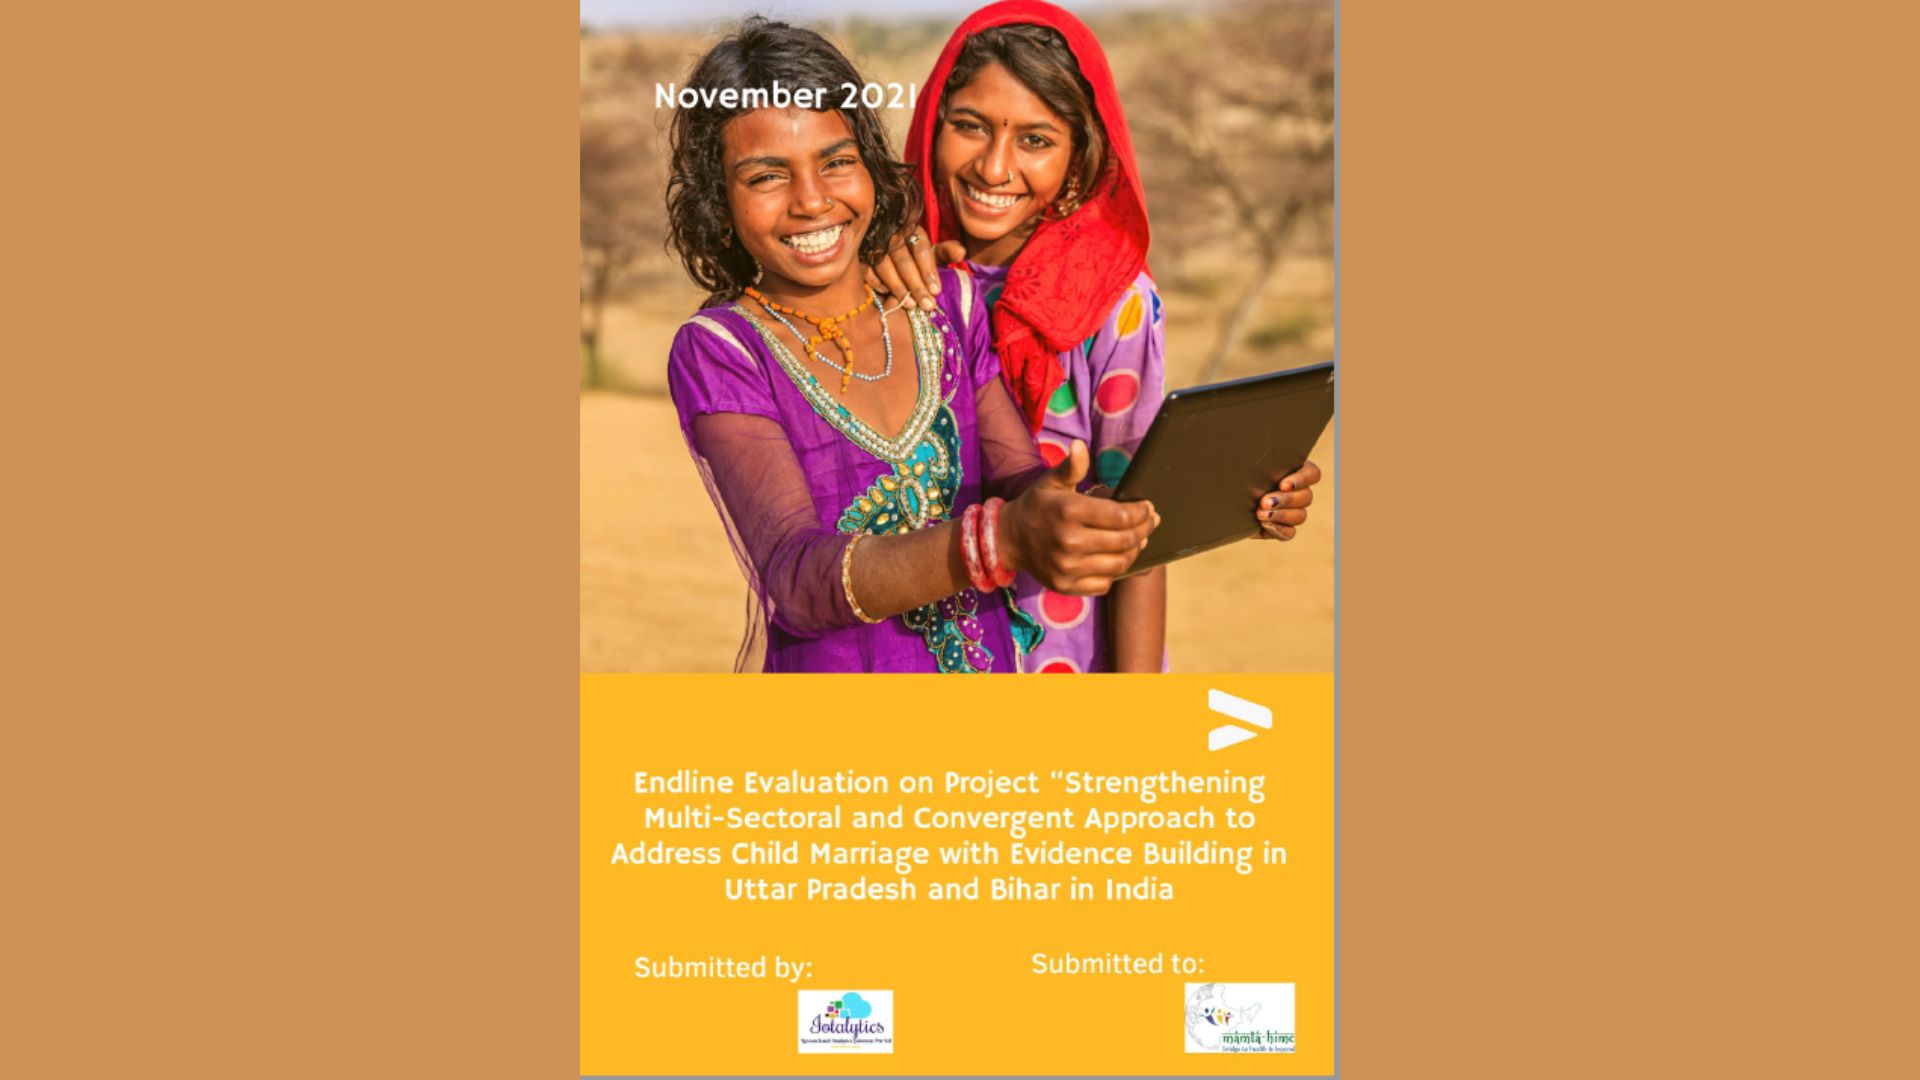 Endline Assessment of Project on “Strengthening Multi-sectoral and Convergent Approach to Address Child Marriage with Evidence Building in Uttar Pradesh and Bihar, India